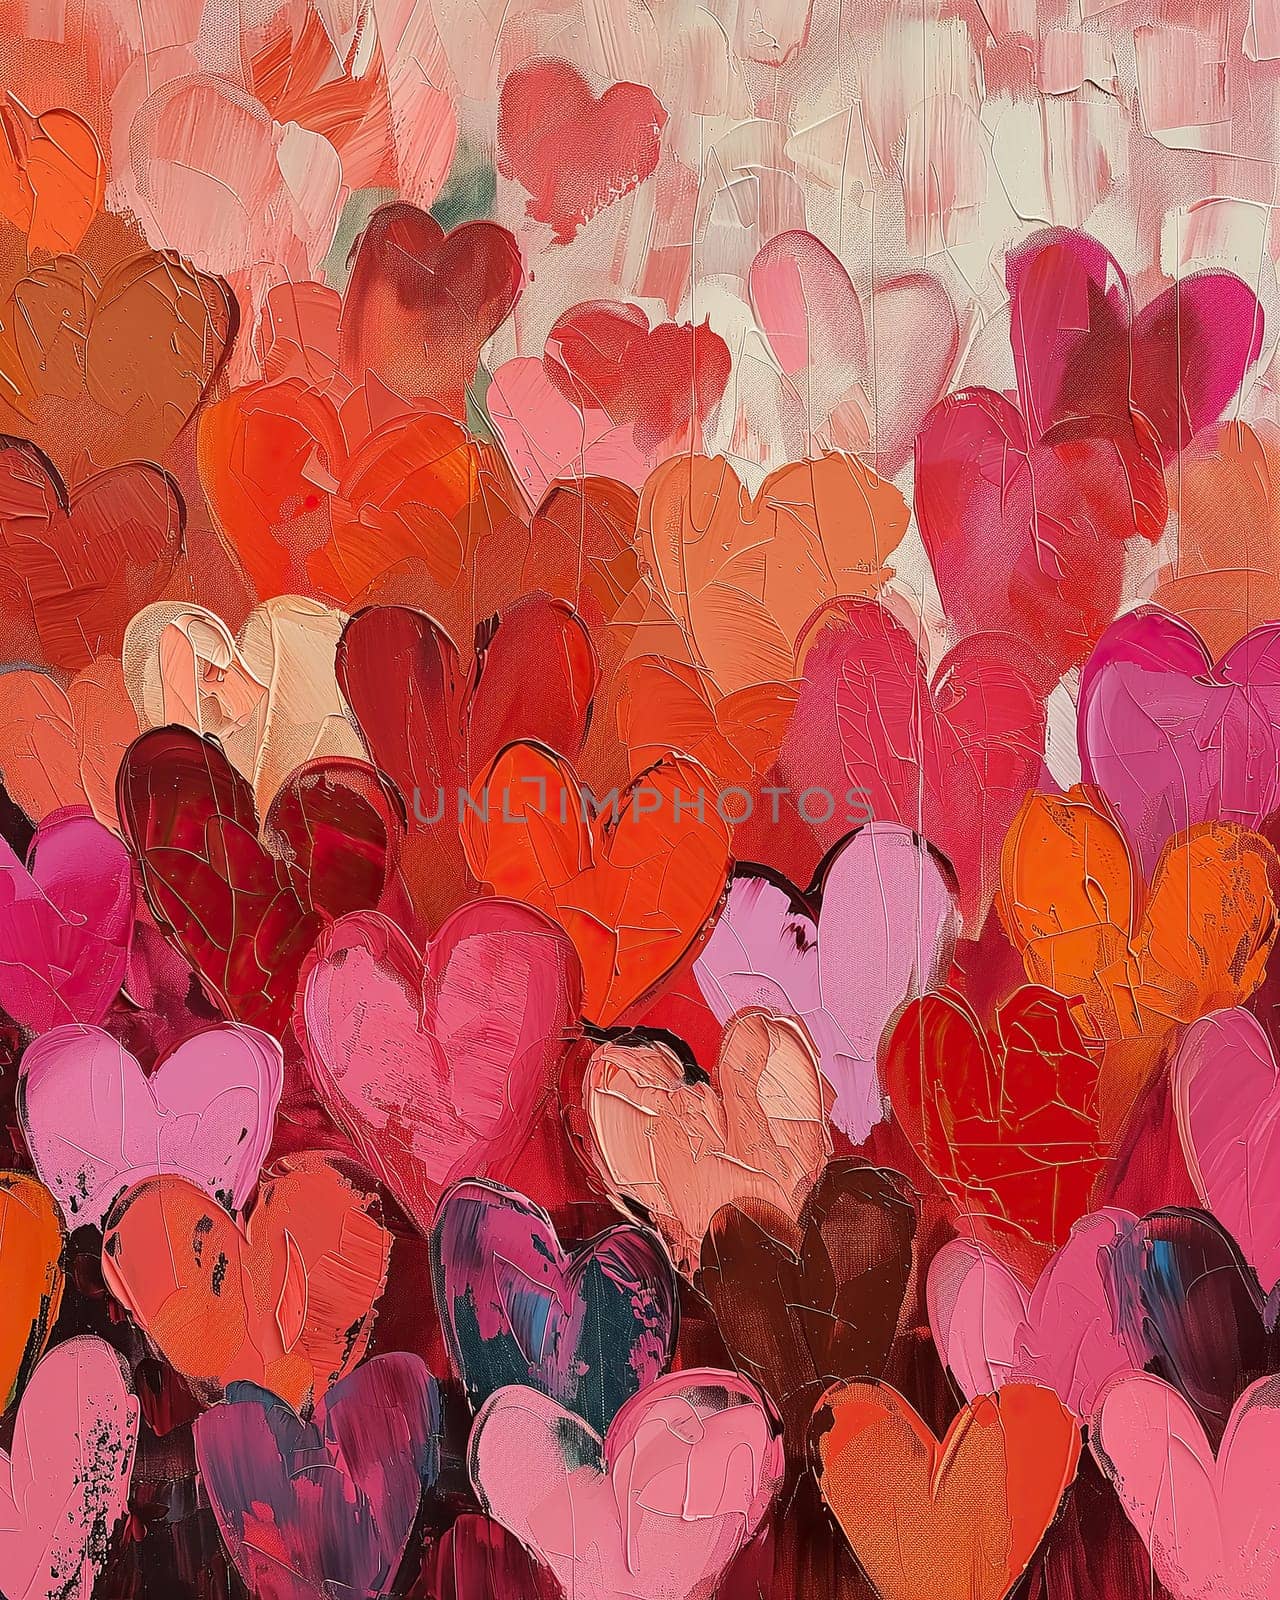 Colorful Hearts Abstract Painting by dimol